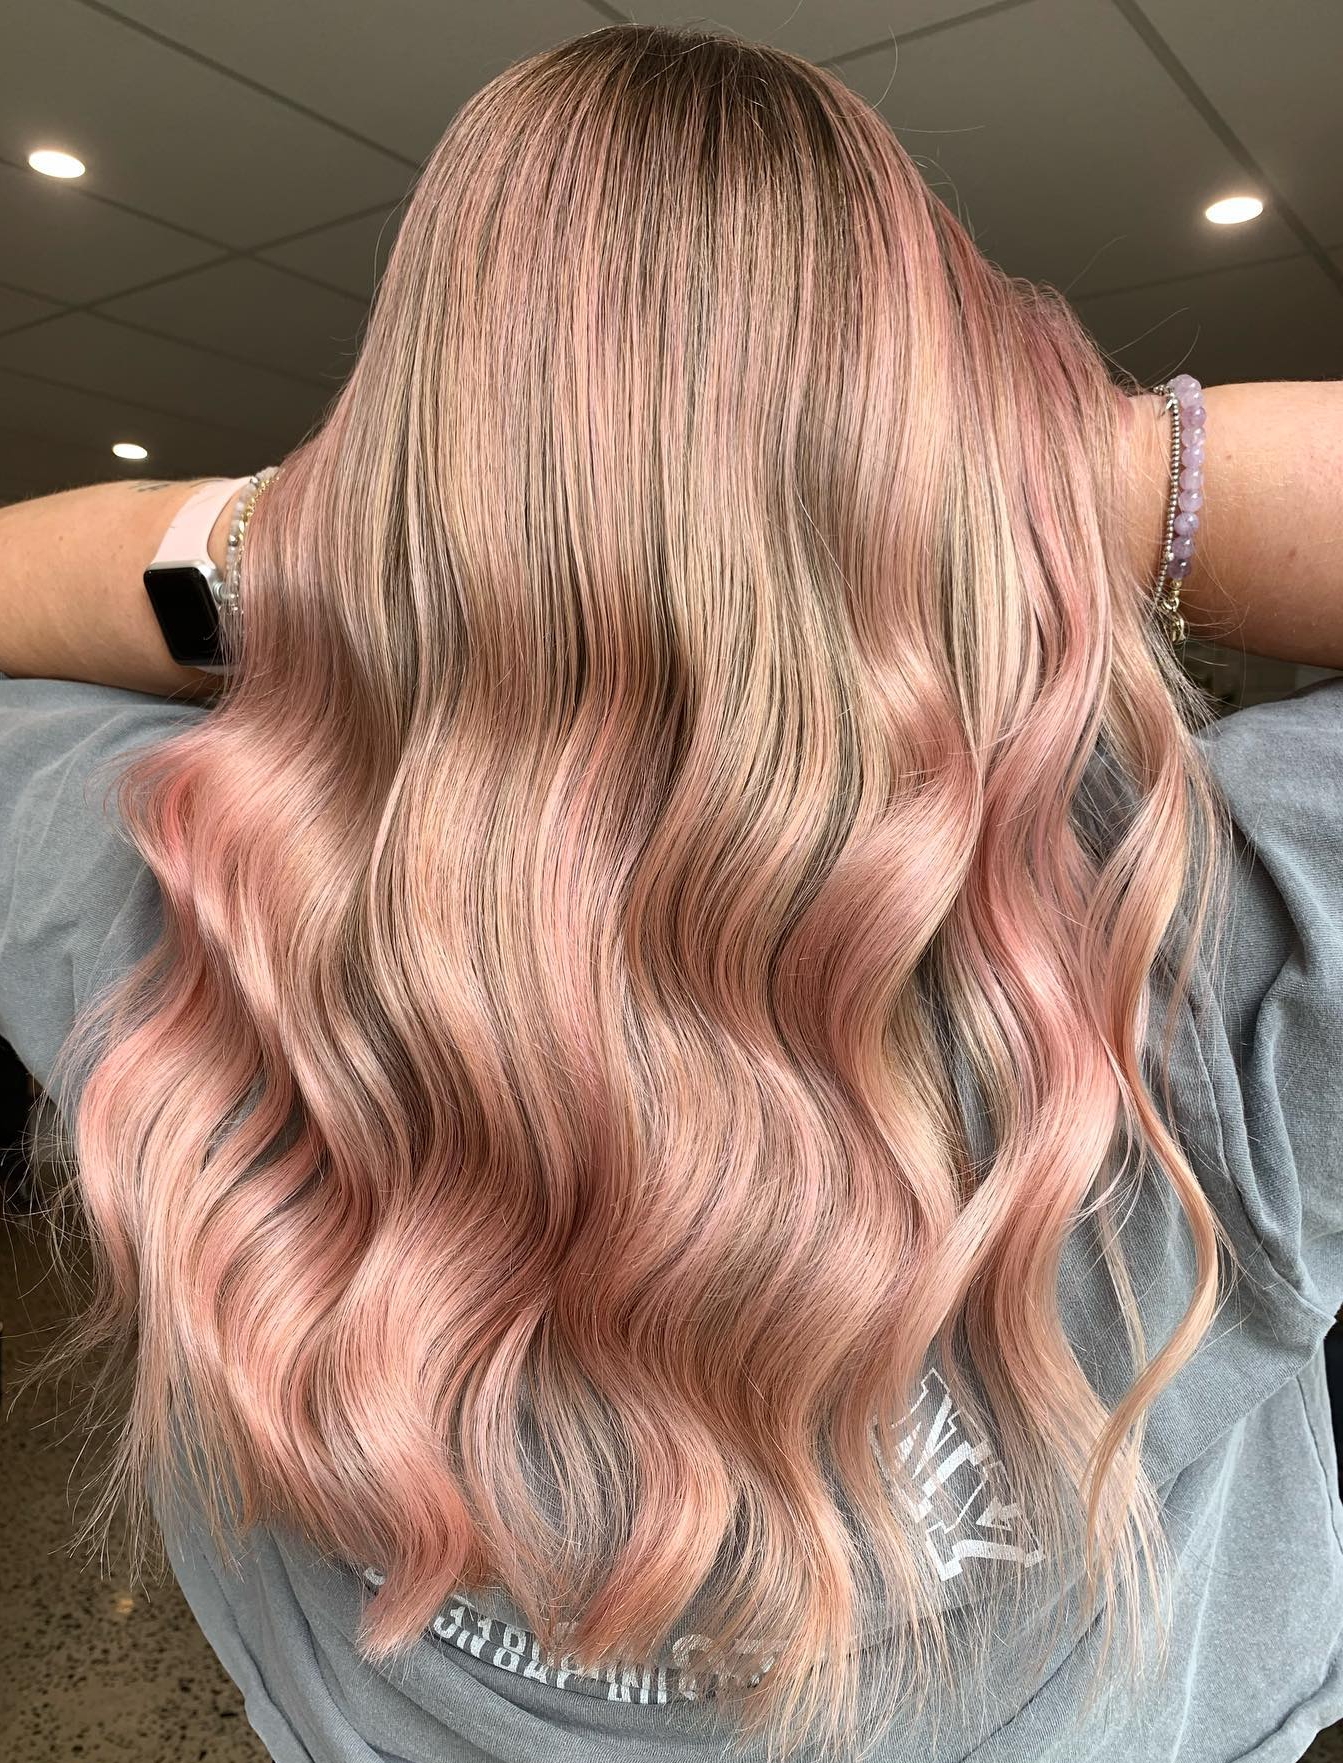 Blonde to Rose Gold Color on Long Wavy Hair